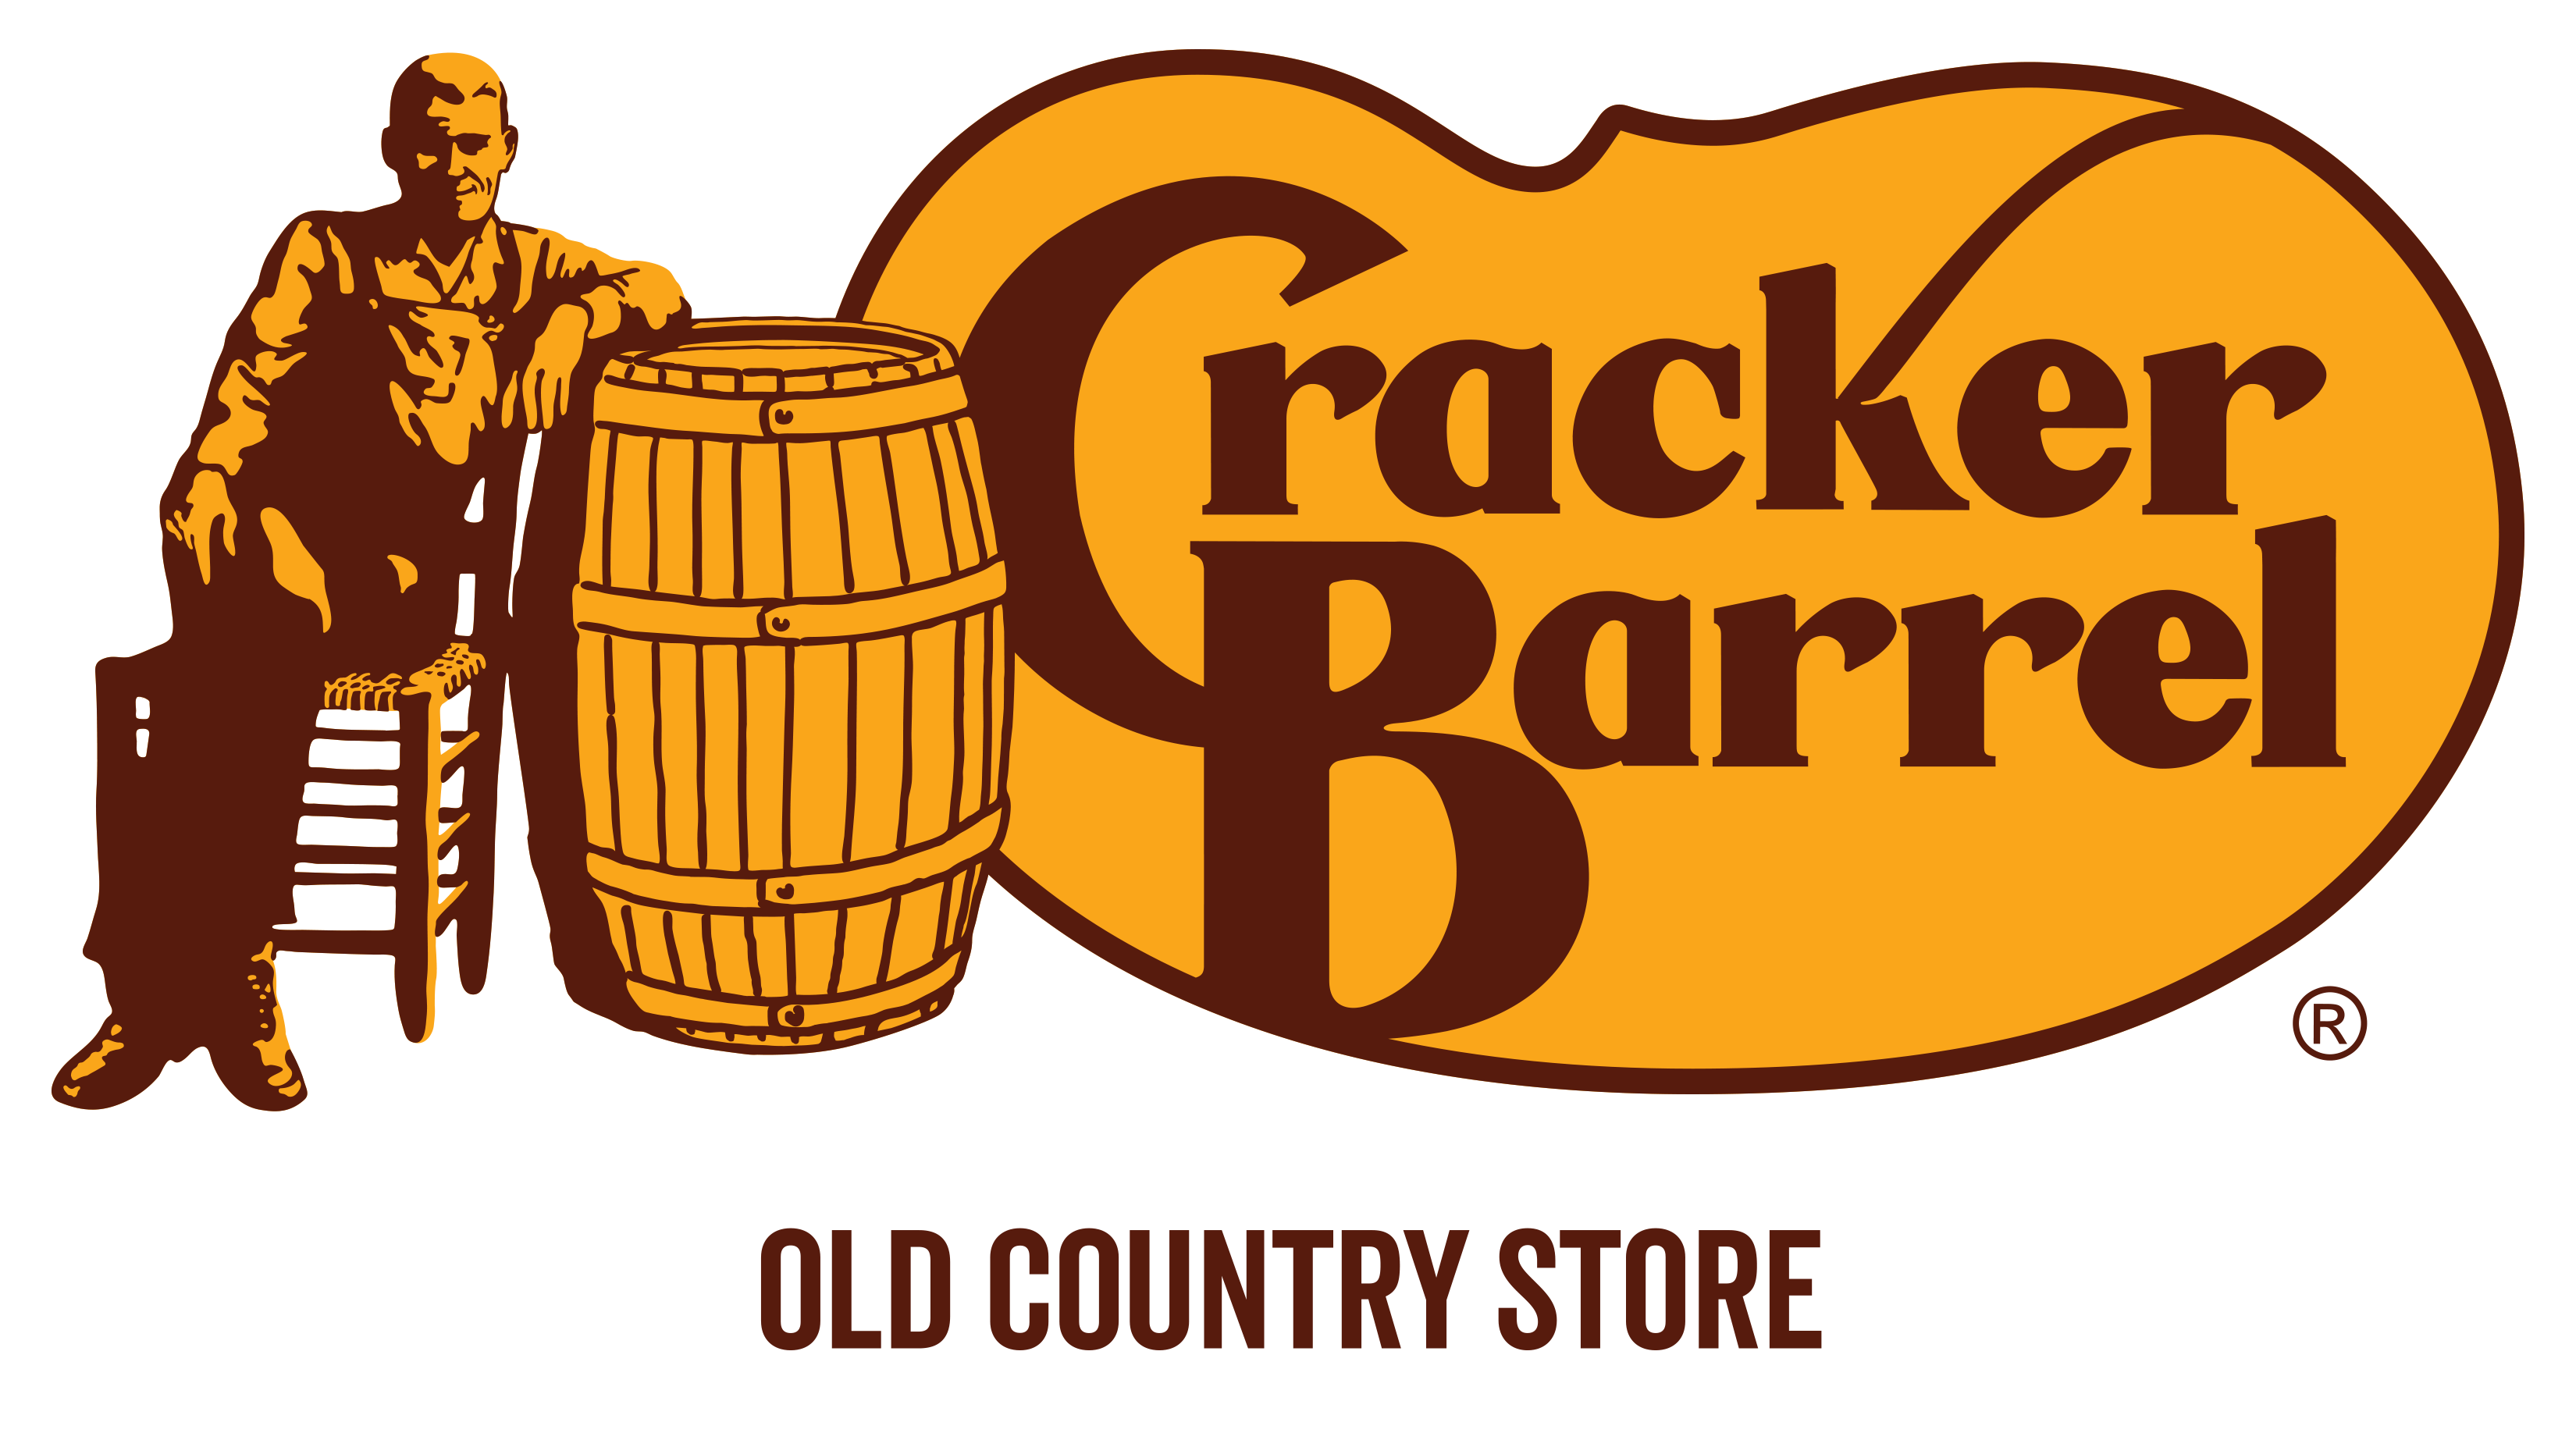 Gain perfect discounts with this Free Shipping Cracker Barrel Old Country Store Promo Code. Save up to 40% OFF with those Cracker Barrel Old Country Store coupons and discounts for July 2022. Combine with coupons, promo codes & deals for maximum savings. Promo Codes